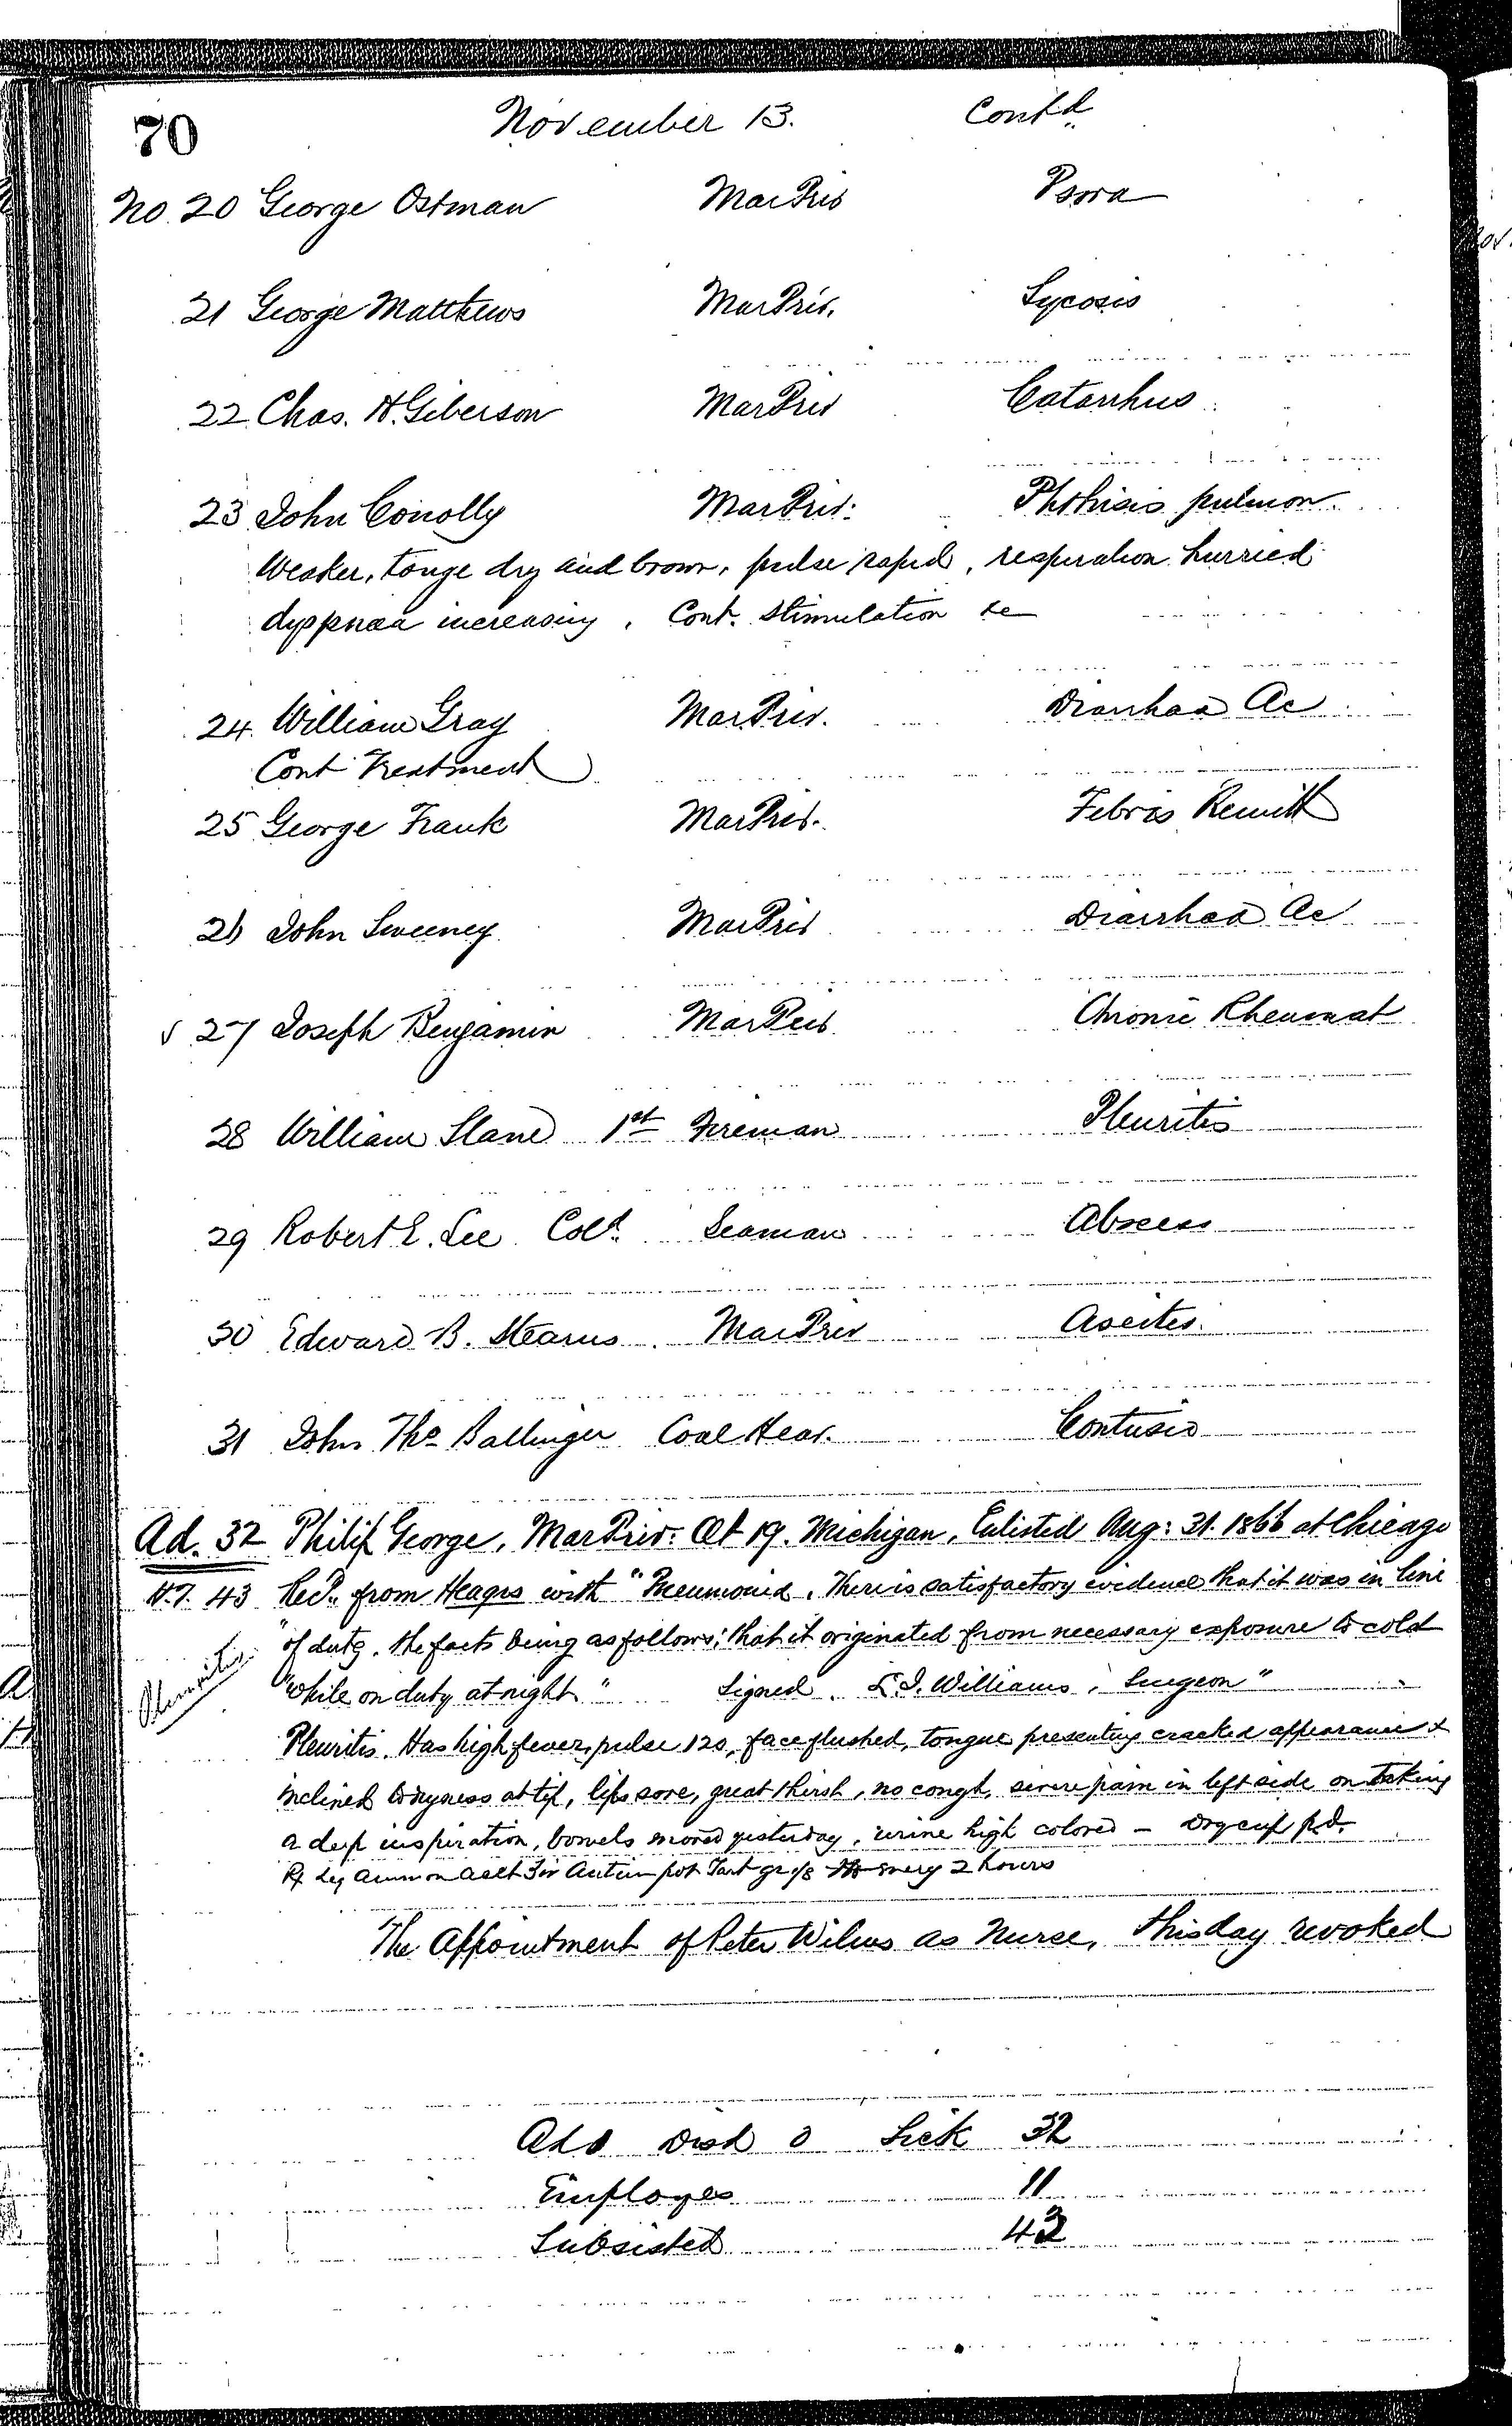 Patients in the Naval Hospital, Washington DC, on November 13, 1866, page 2 of 2, in the Medical Journal, October 1, 1866 to March 20, 1867